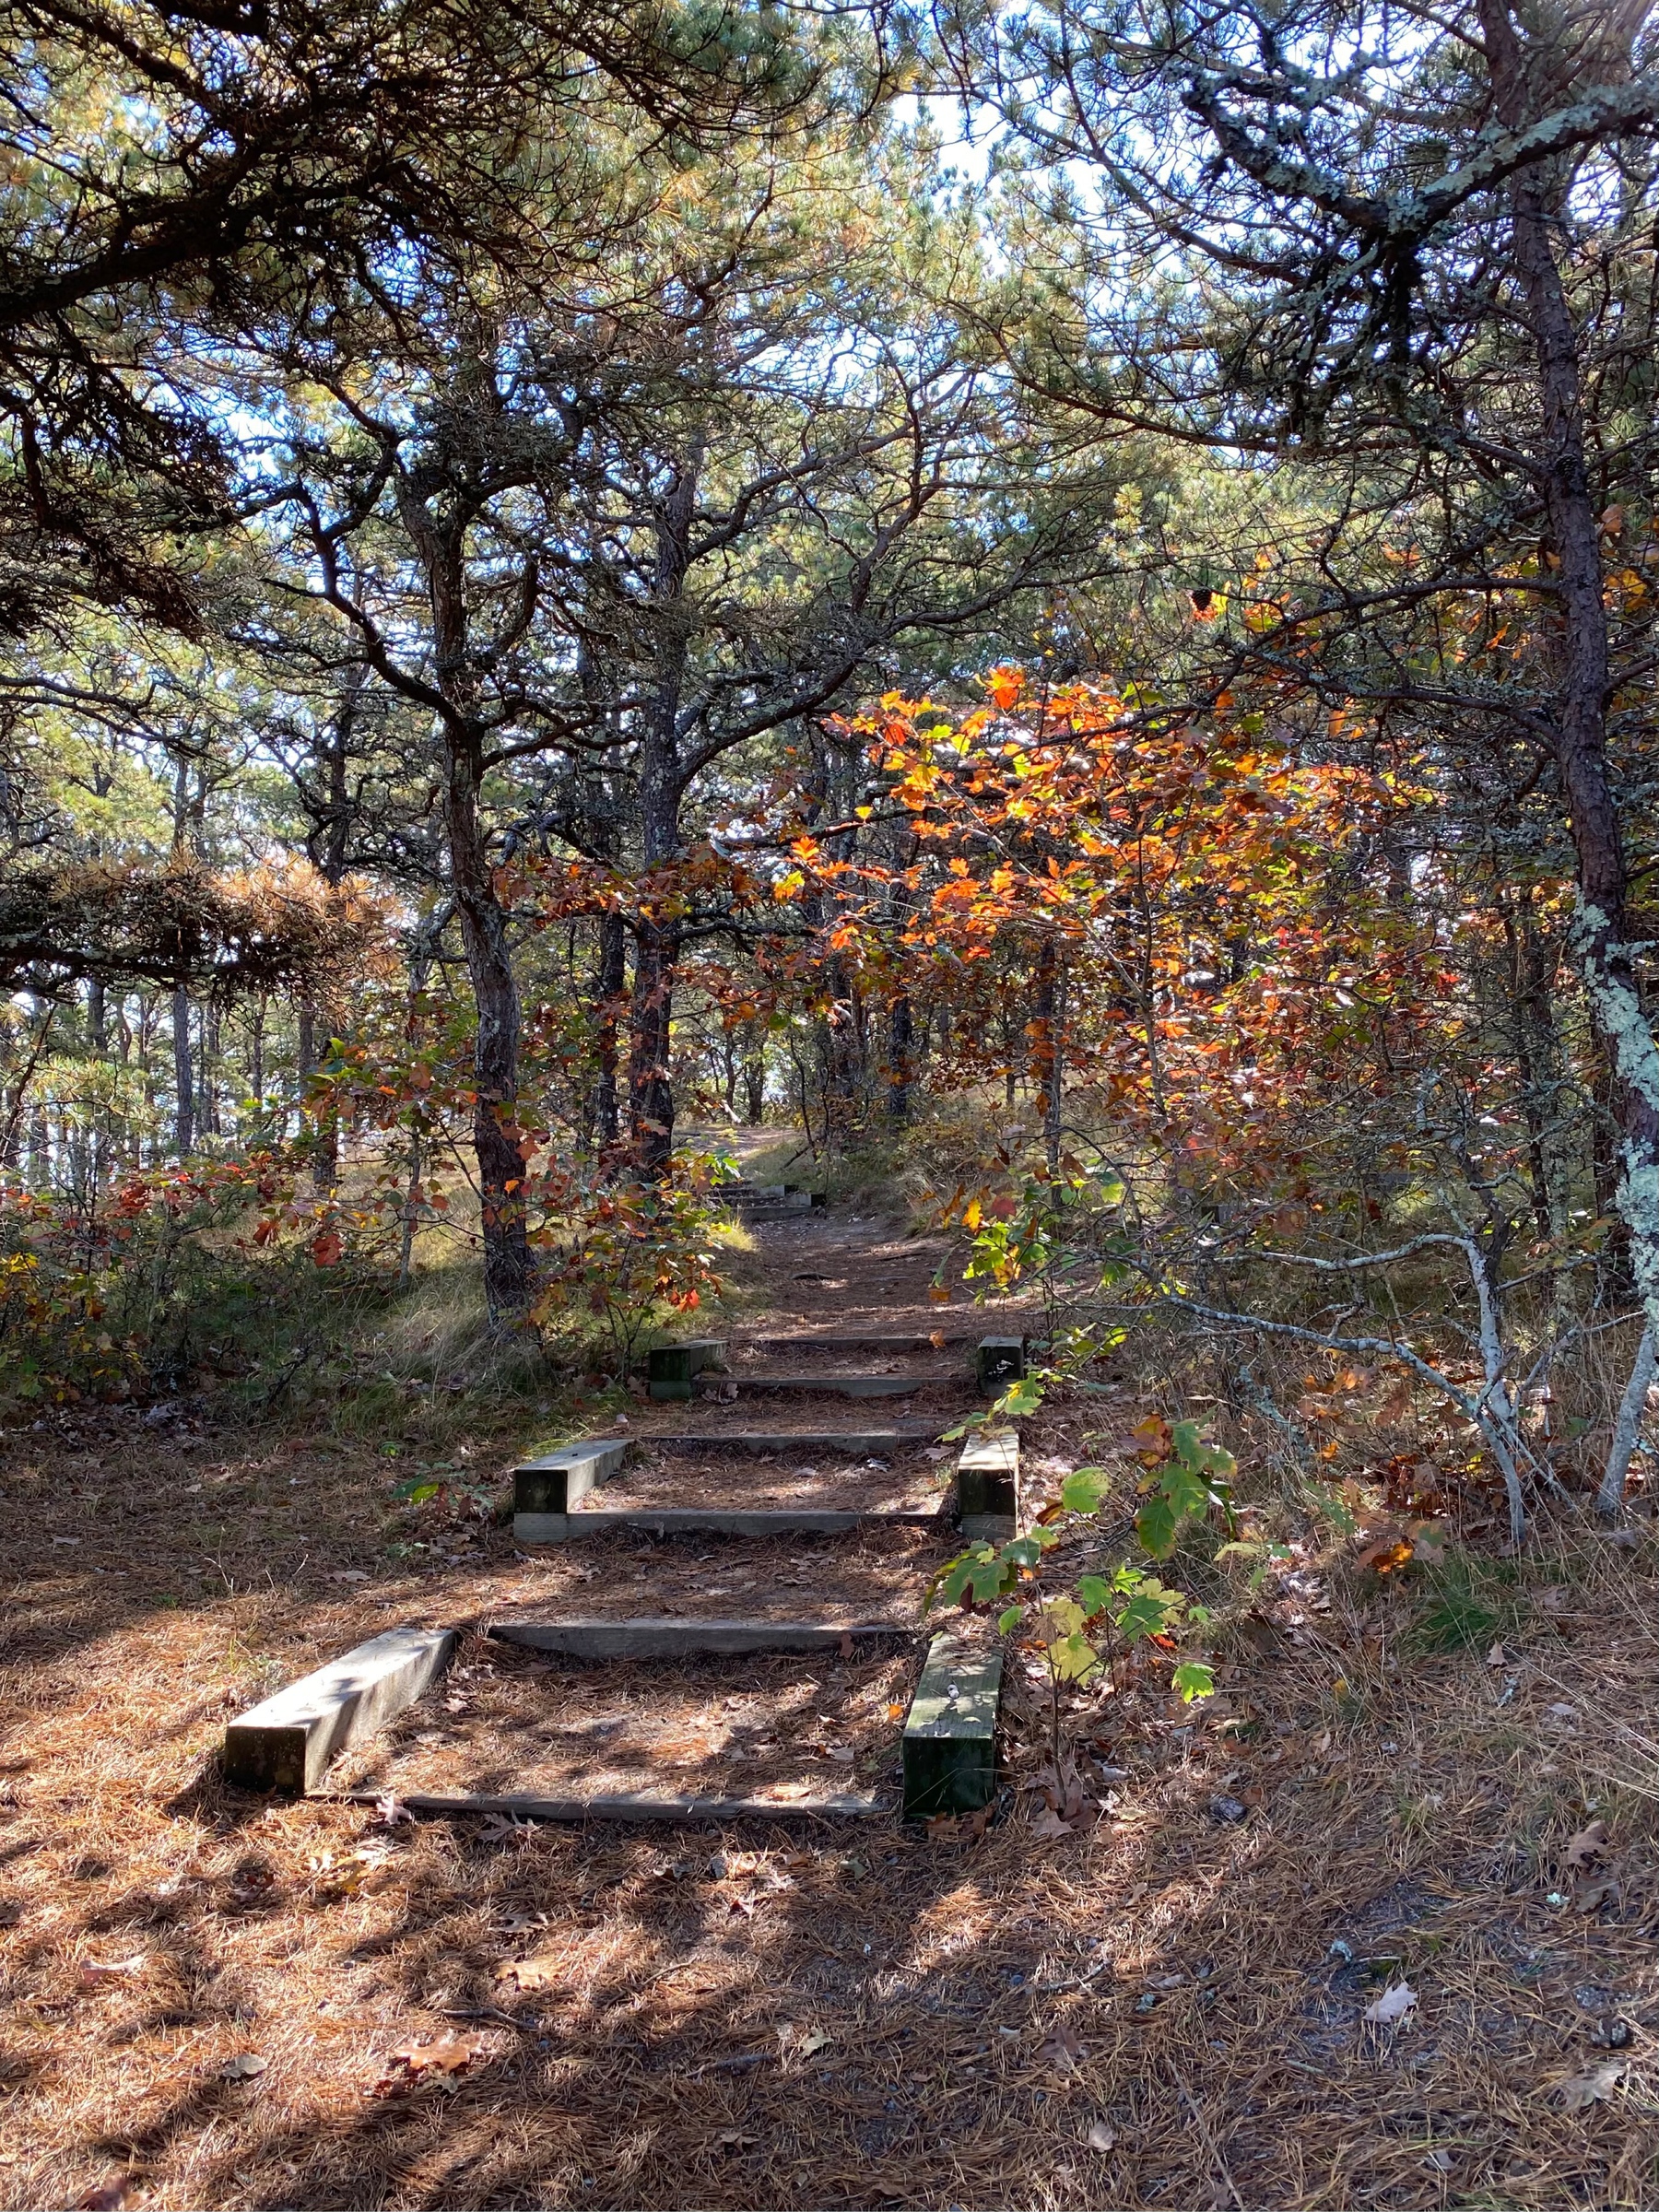 Steps leading up a small hill into a pine forest, with sunlight streaming through the branches.